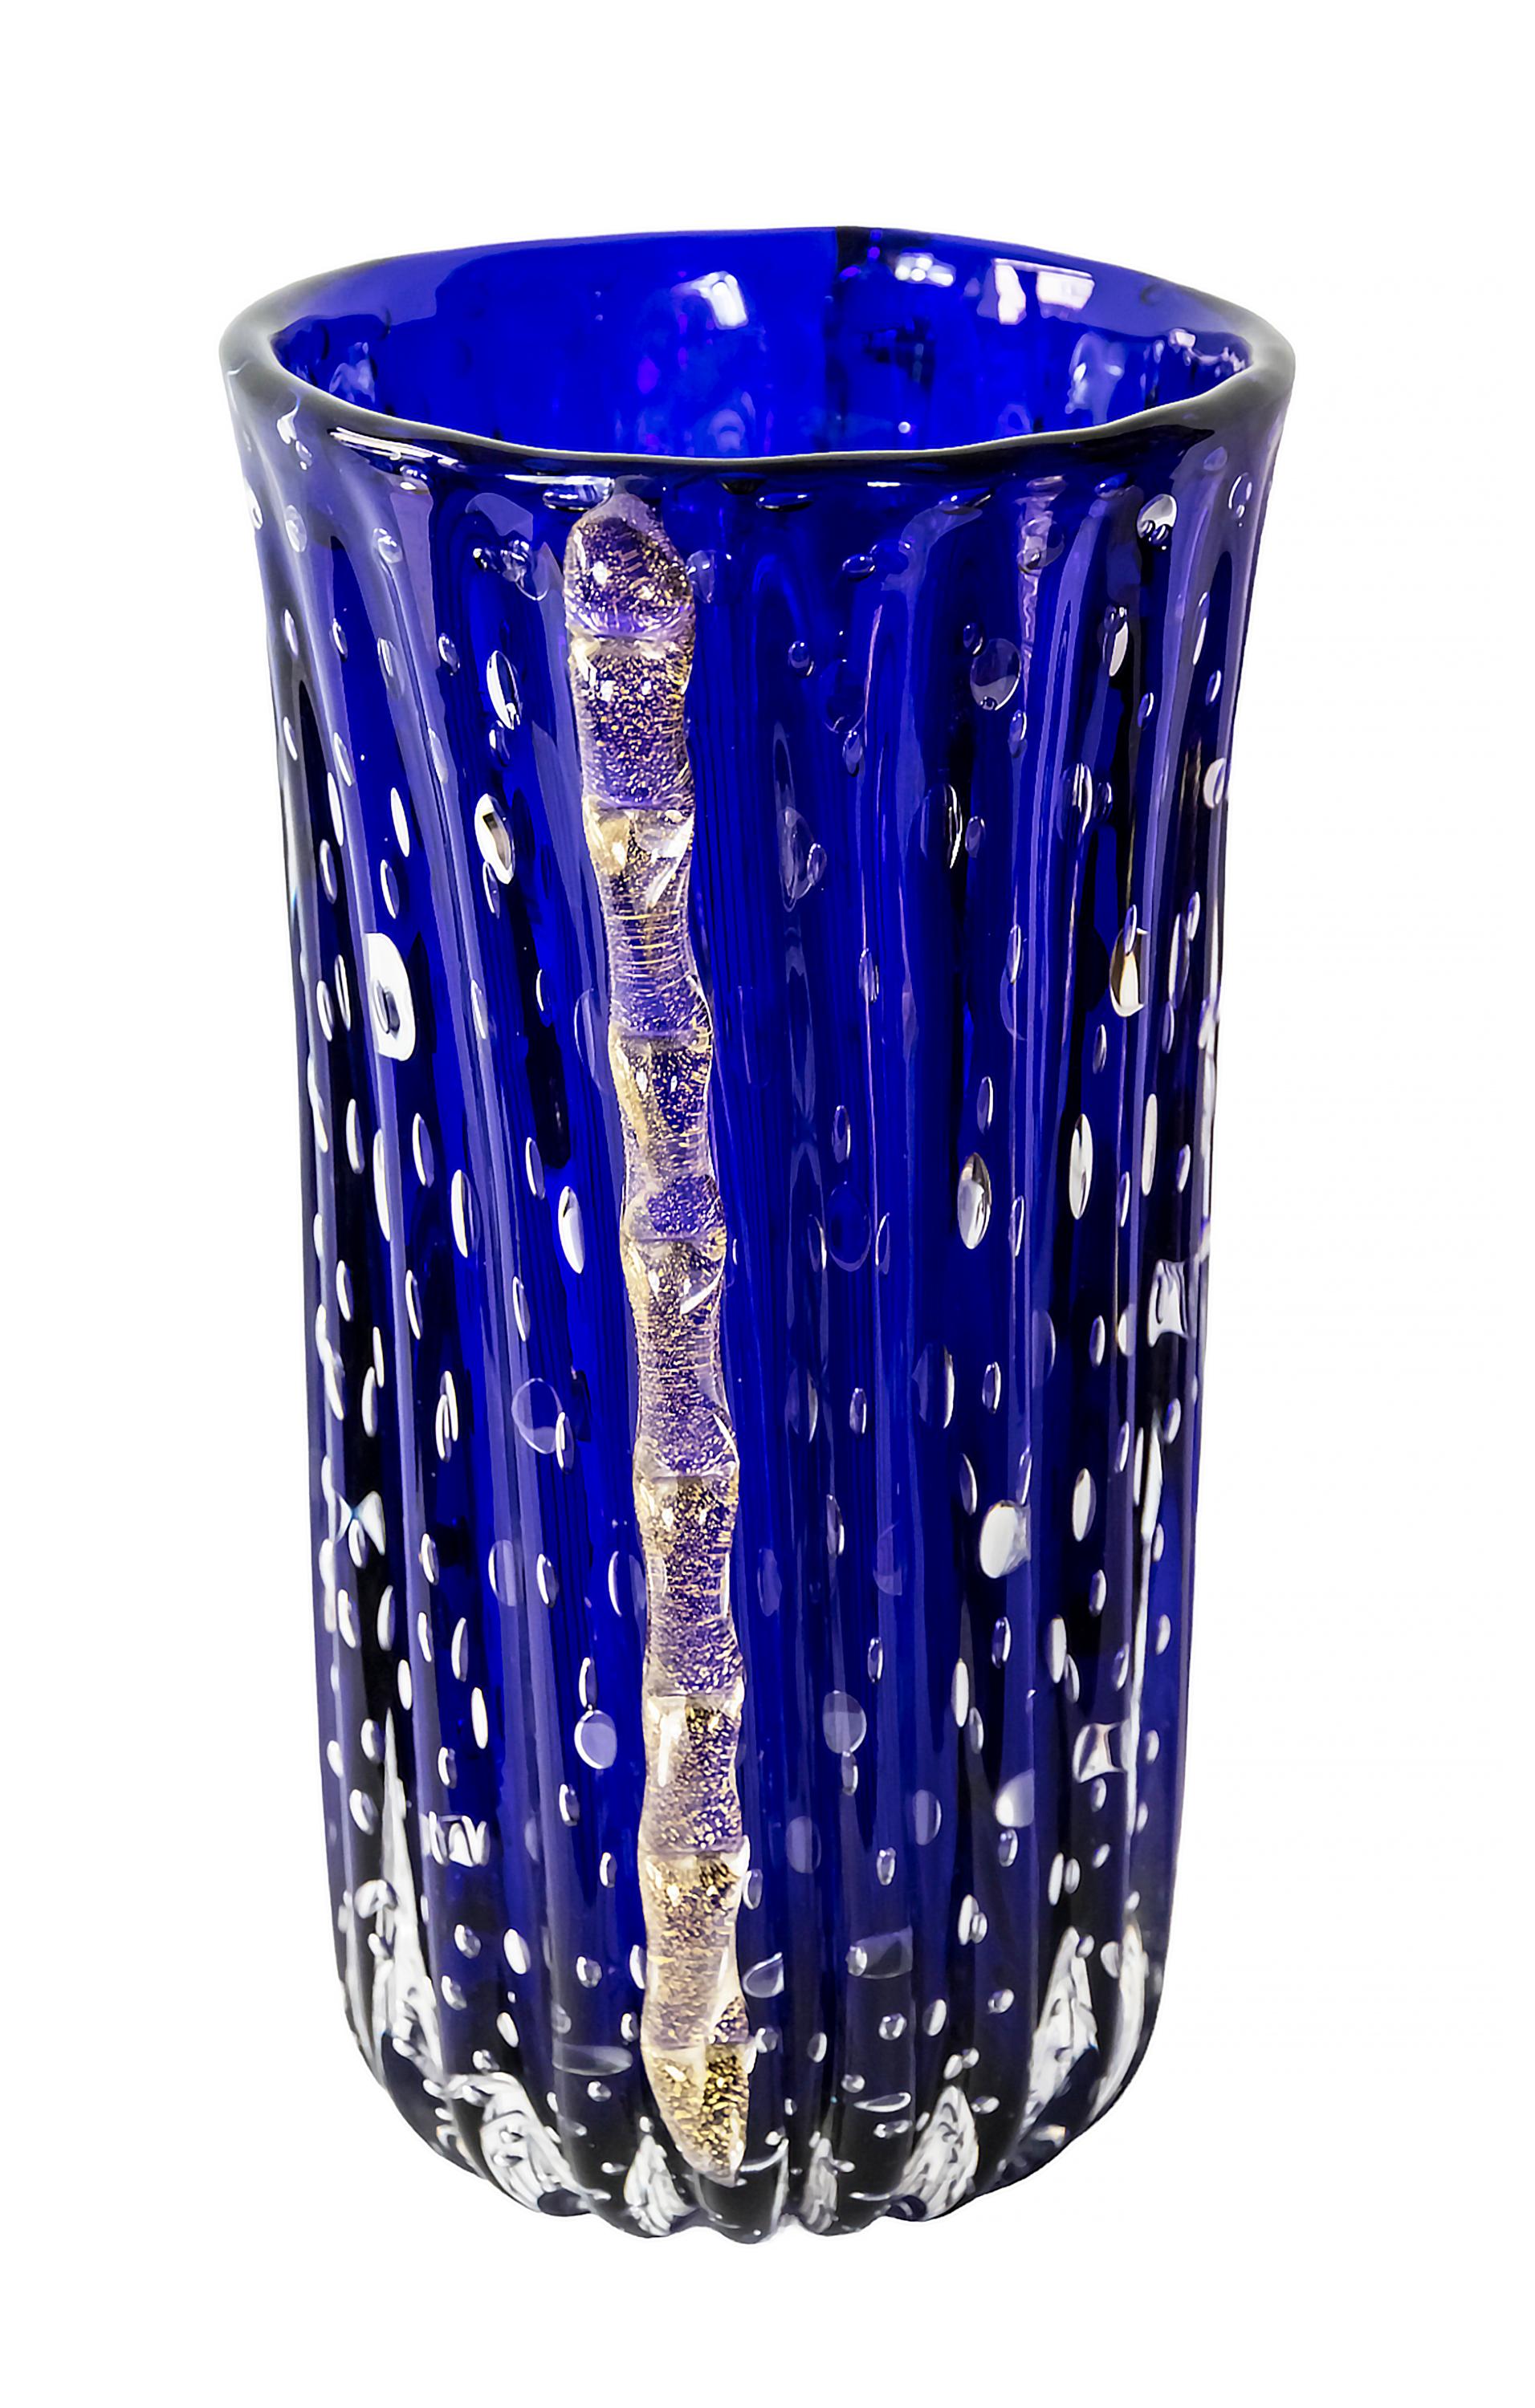 Italian handmade Murano glass vase from circa 1970s.
The glass is deep blue color with air bubbles inside.
The sides are decorated with inlaid gold dust glass details.